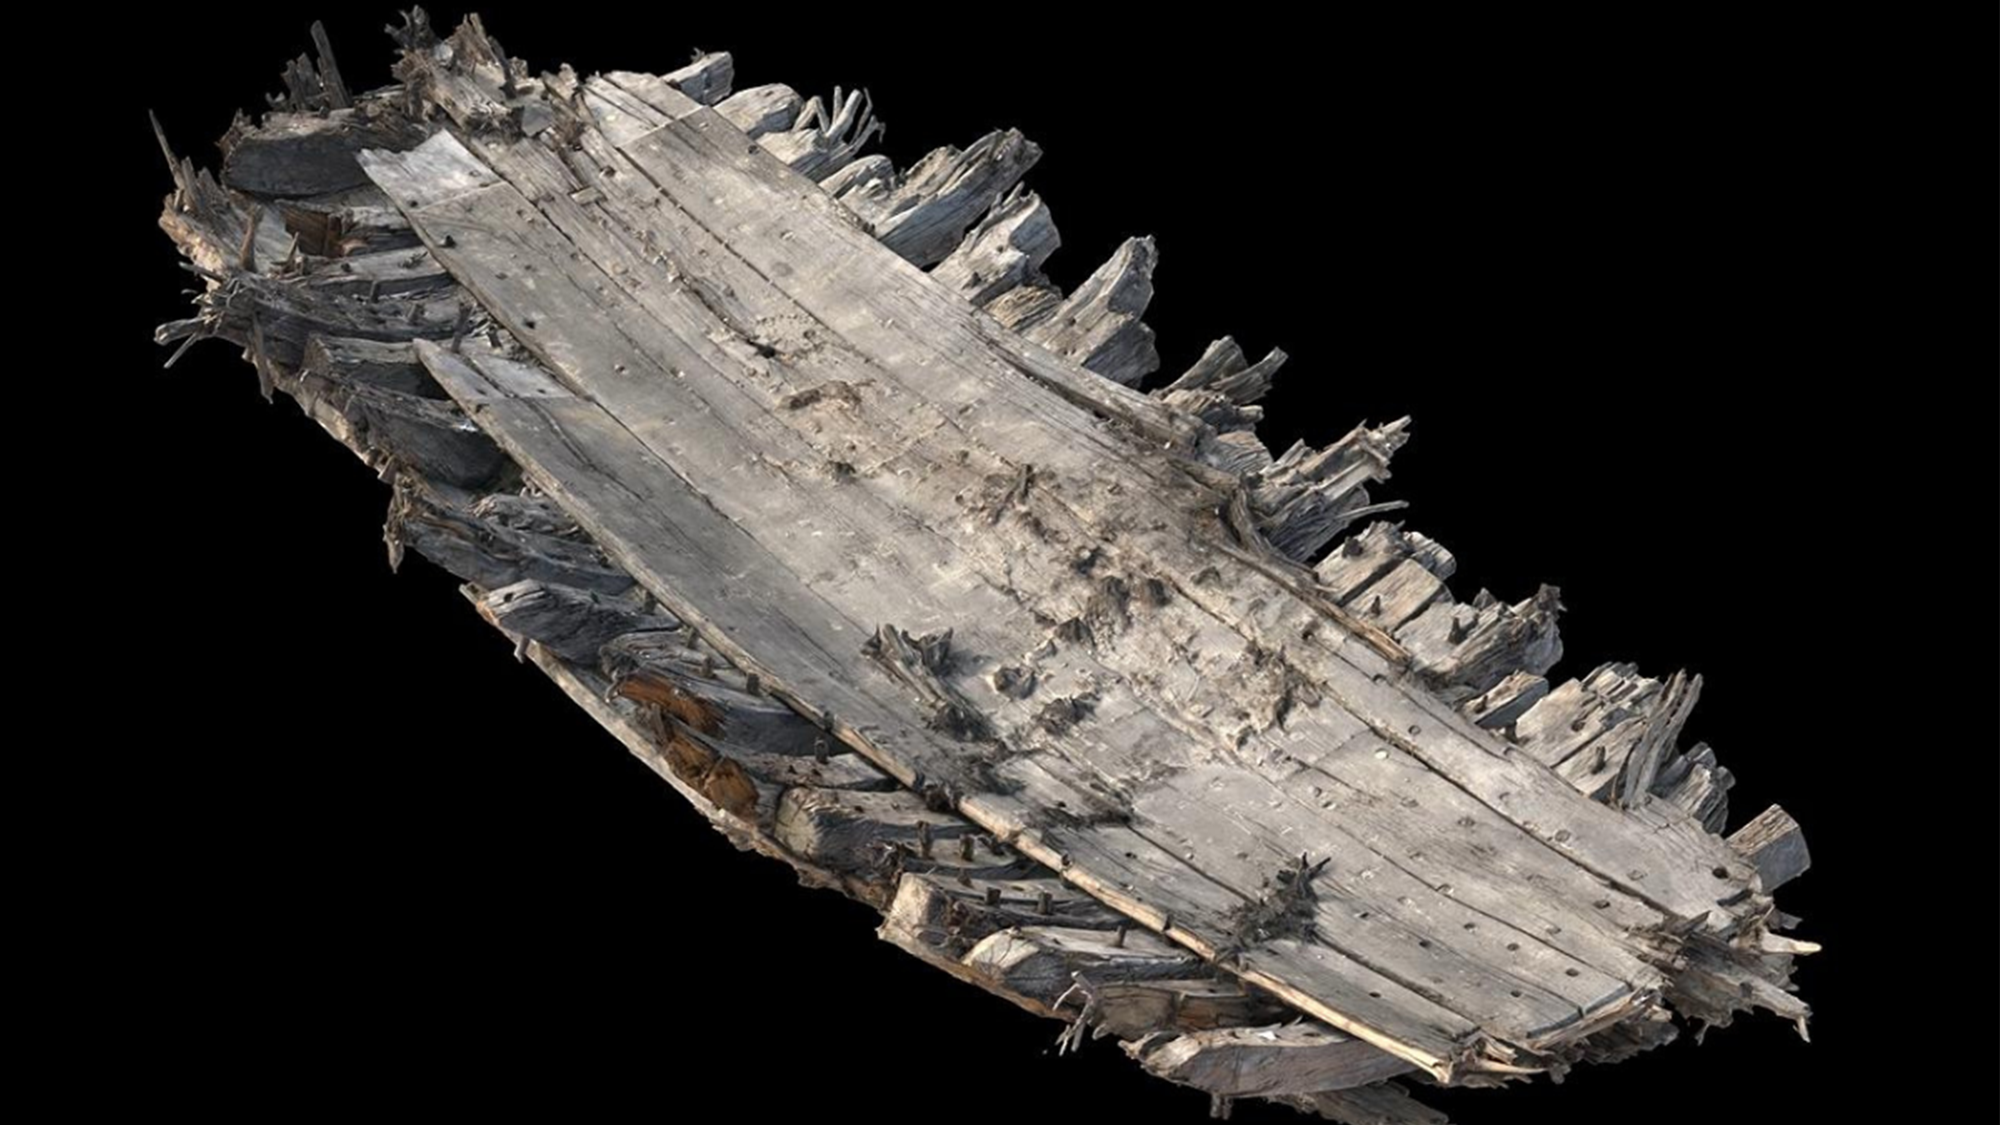 A still from a 3D model of the 16th-century ship found at Dungeness quarry